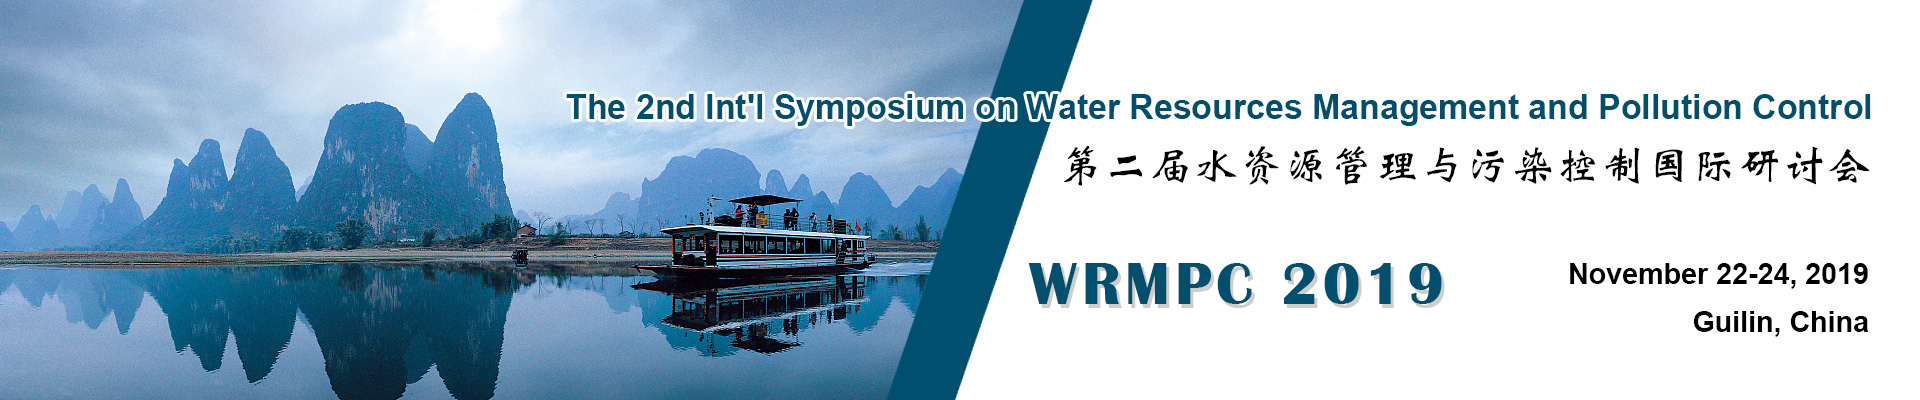 The 2nd Int'l Symposium on Water Resources Management and Pollution Control (WRMPC 2019)